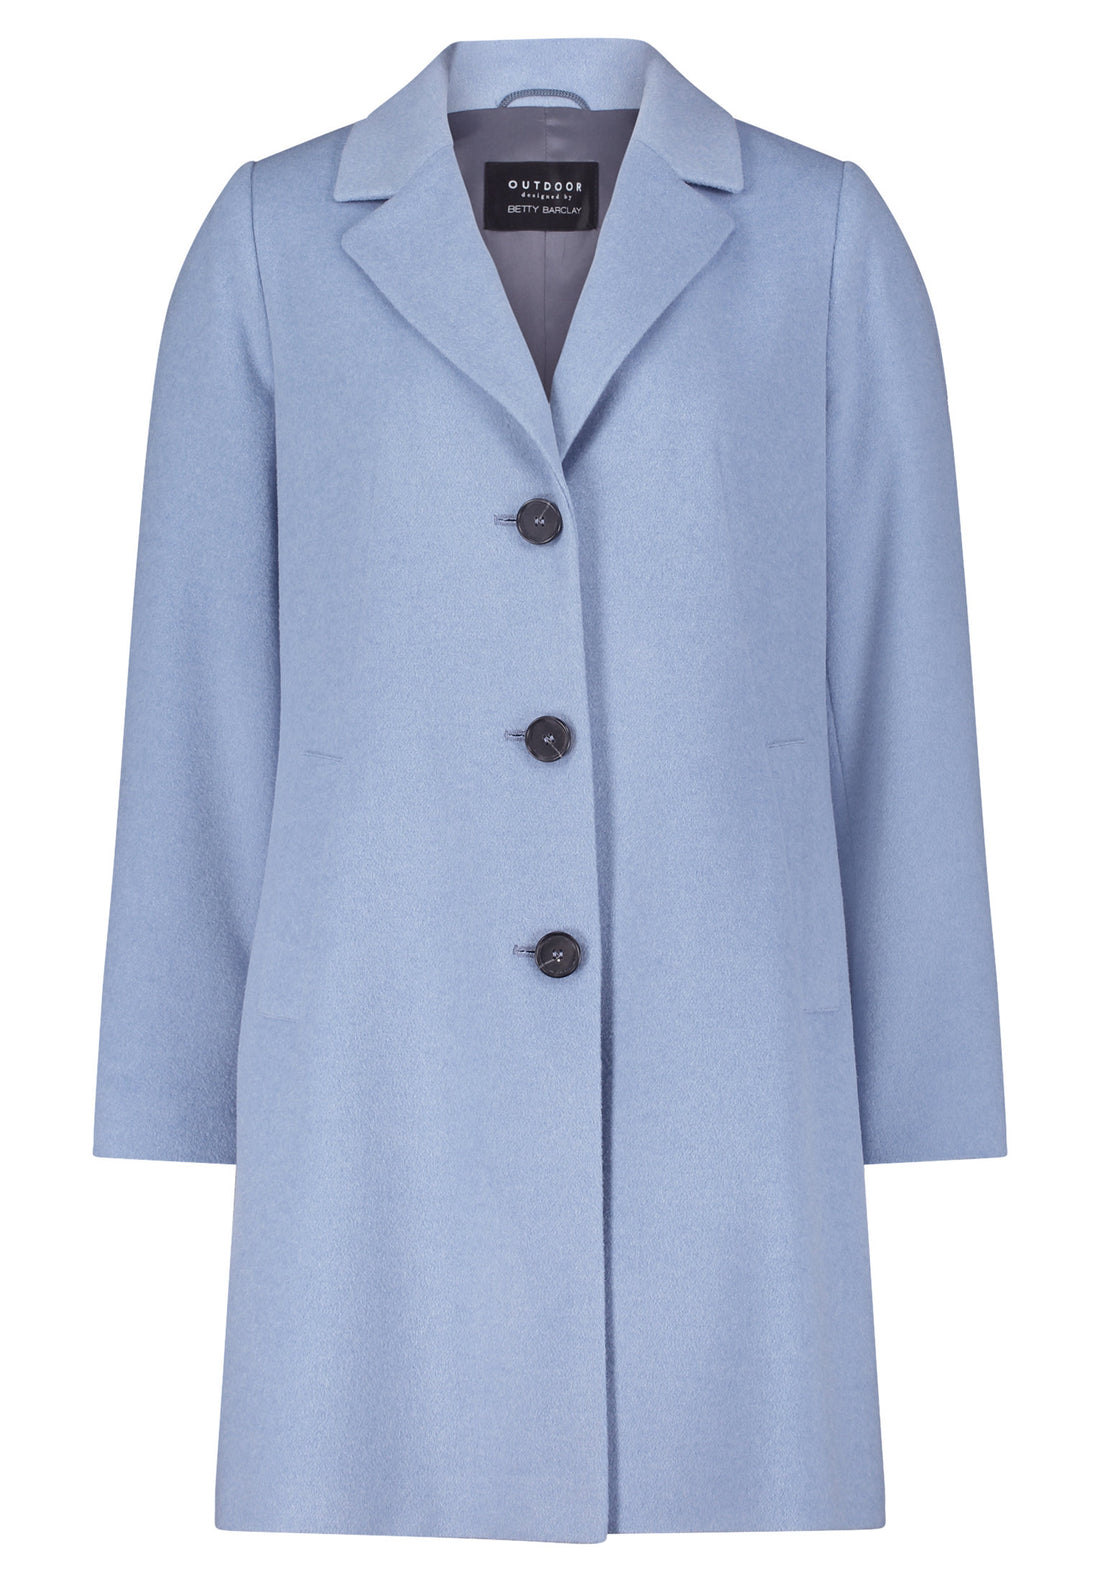 Blue Collared Button Up Coat_7578-2146_8002_01